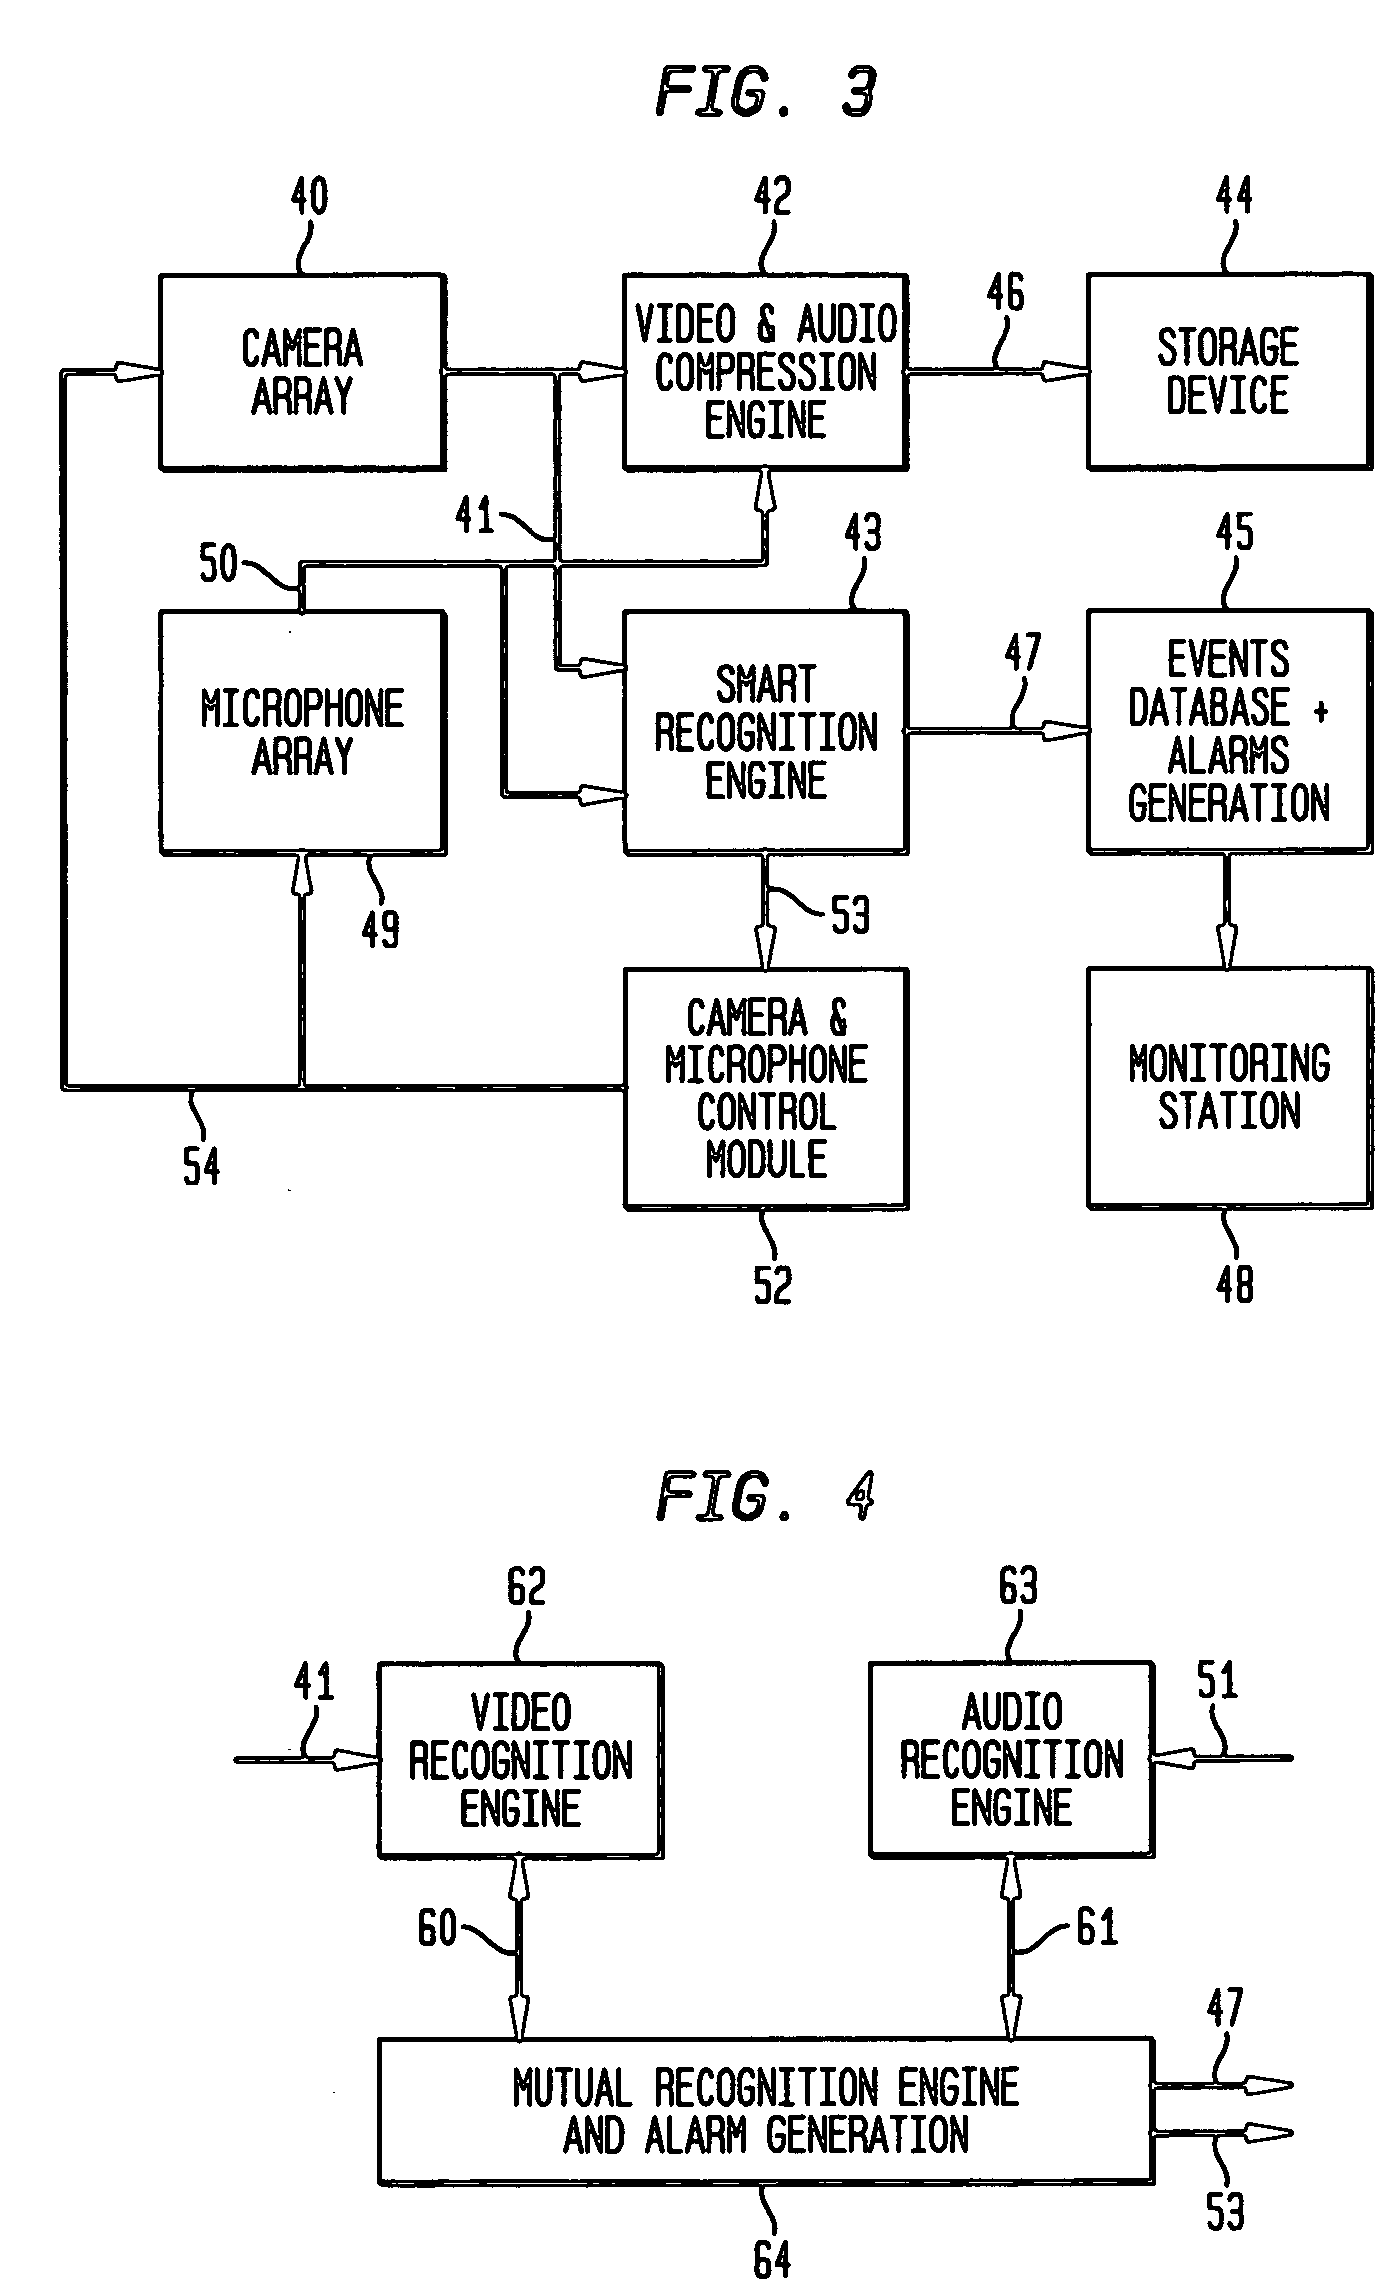 Video surveillance system and method with combined video and audio recognition